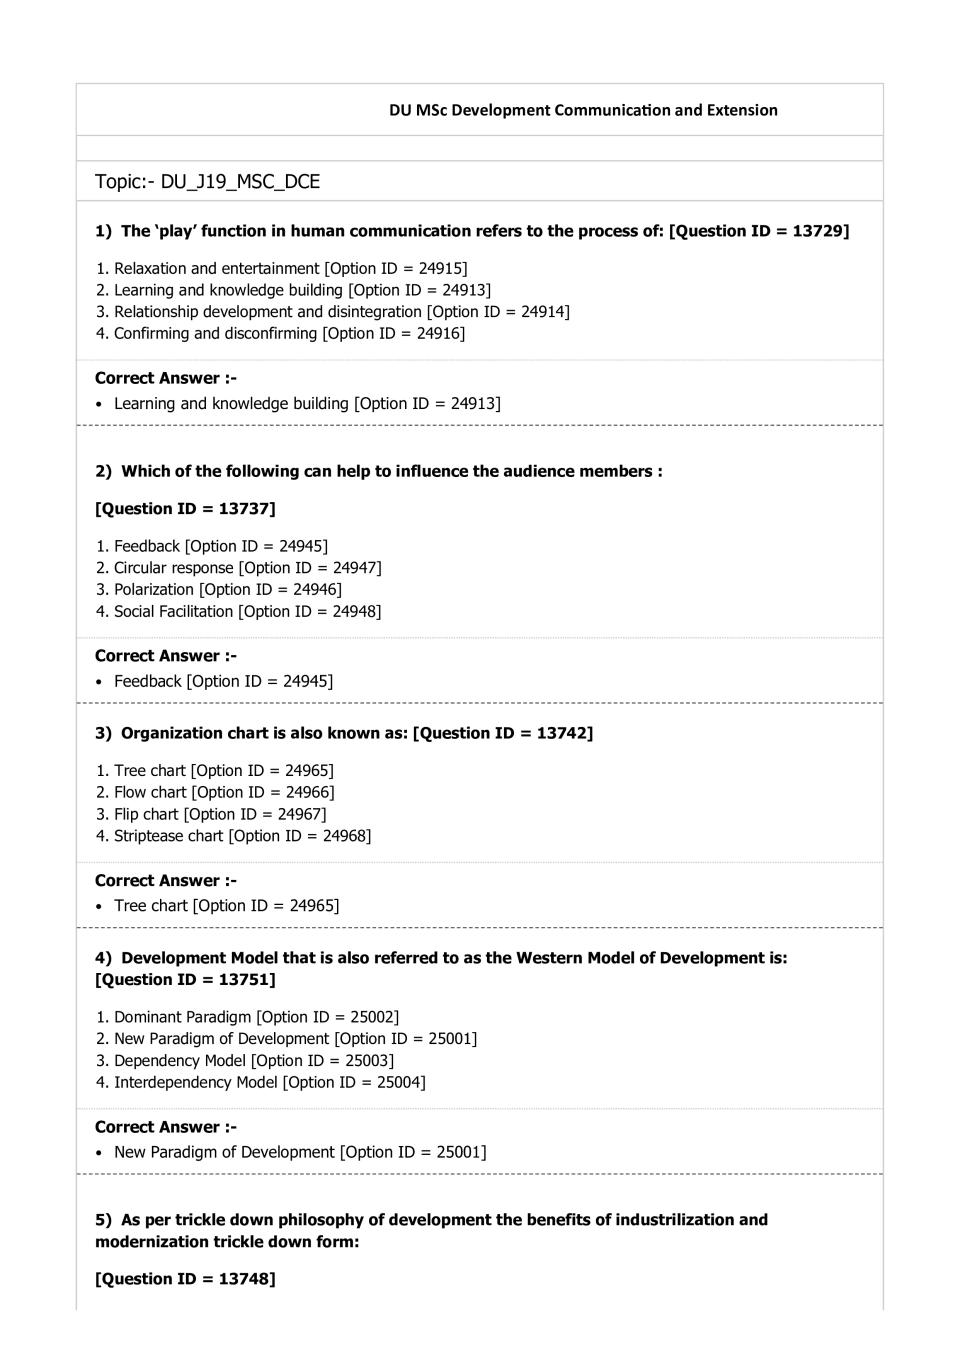 DUET Question Paper 2019 for M.Sc Development Communication and Extension - Page 1